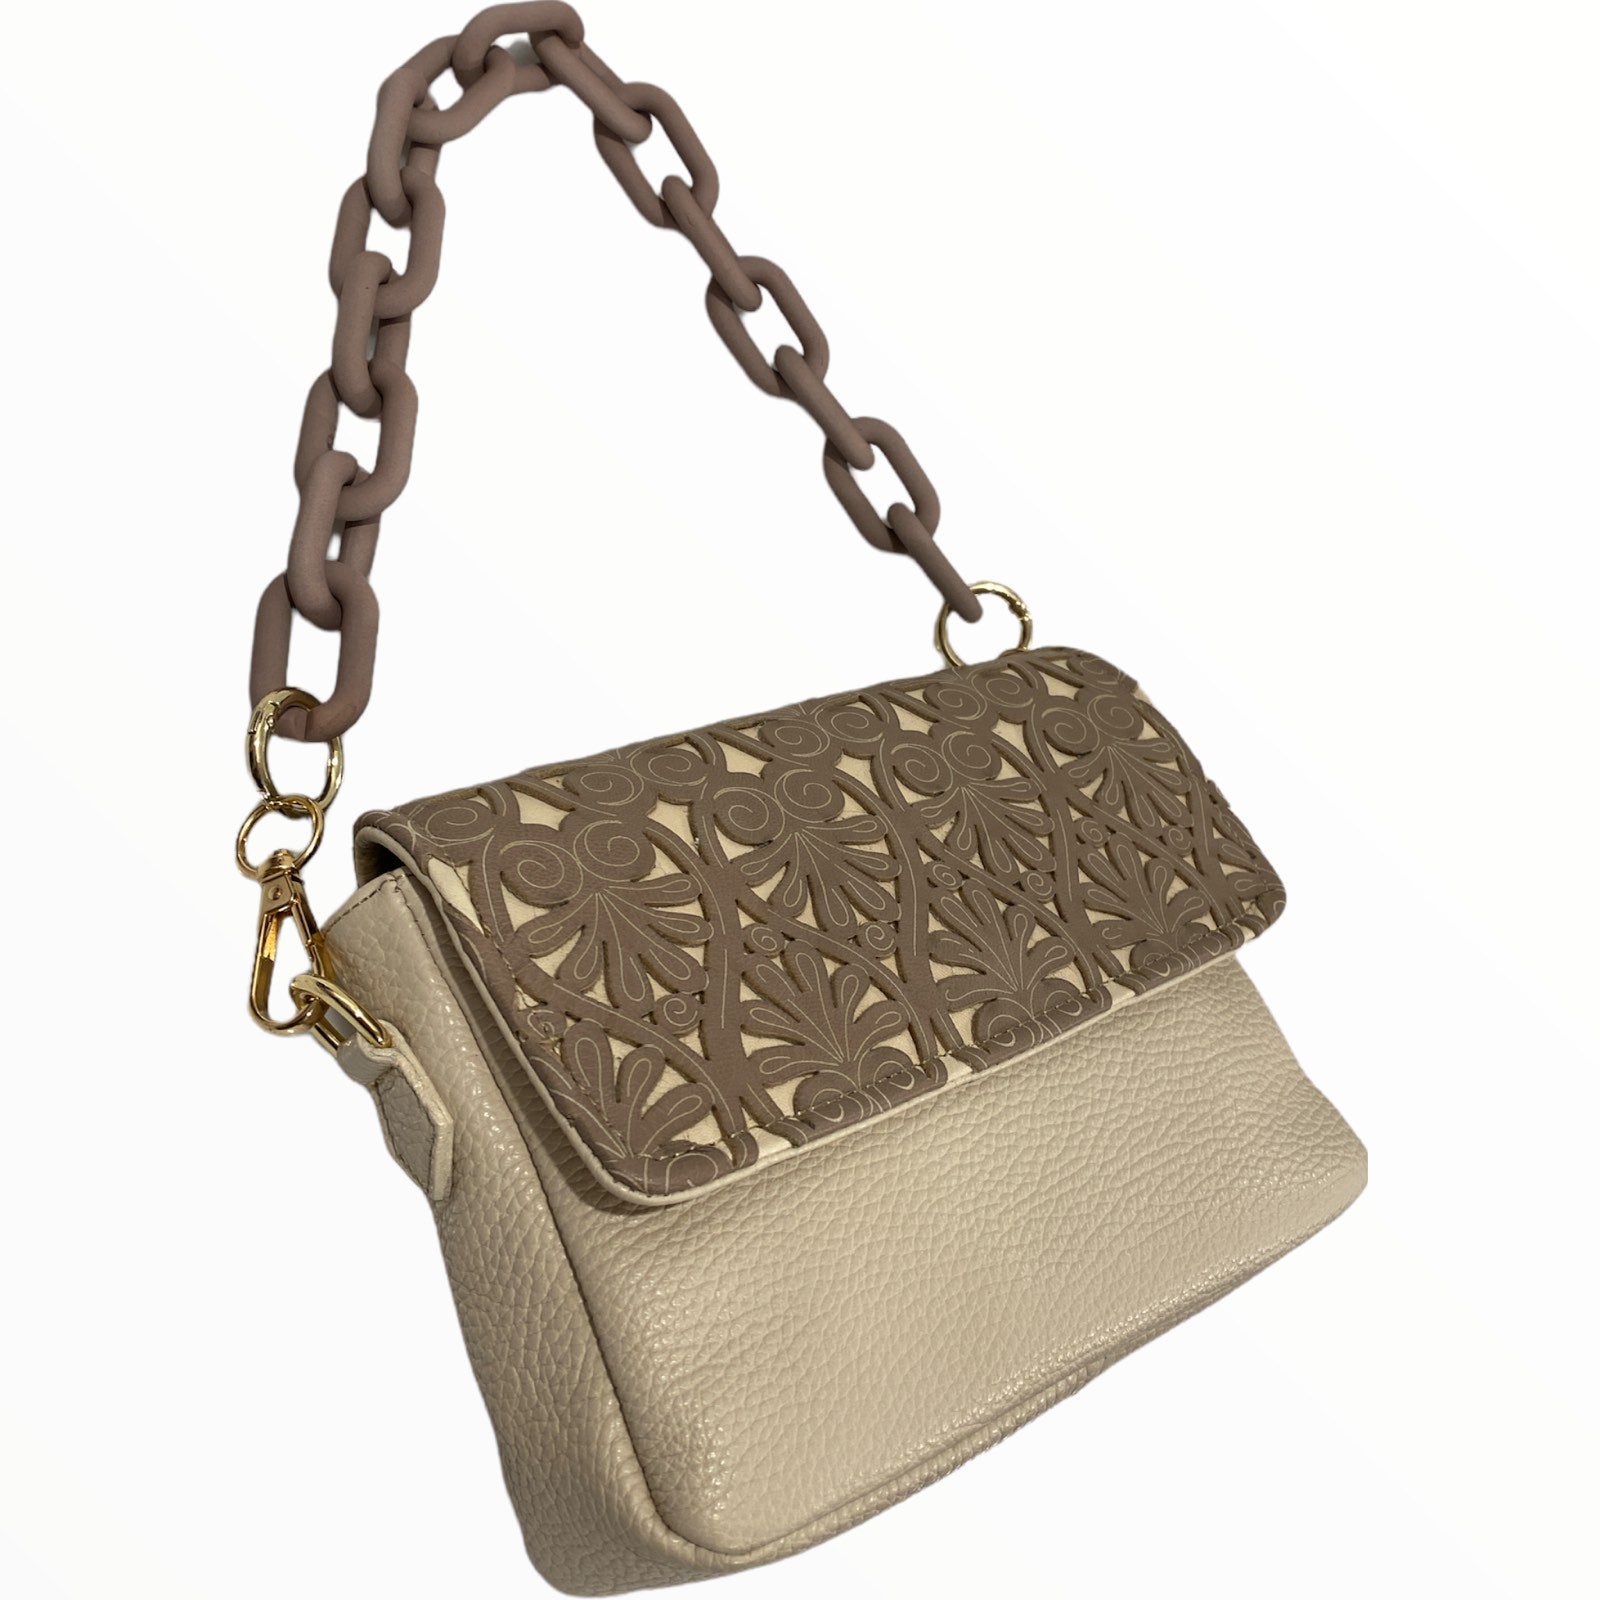 Beige chic leather evening bag